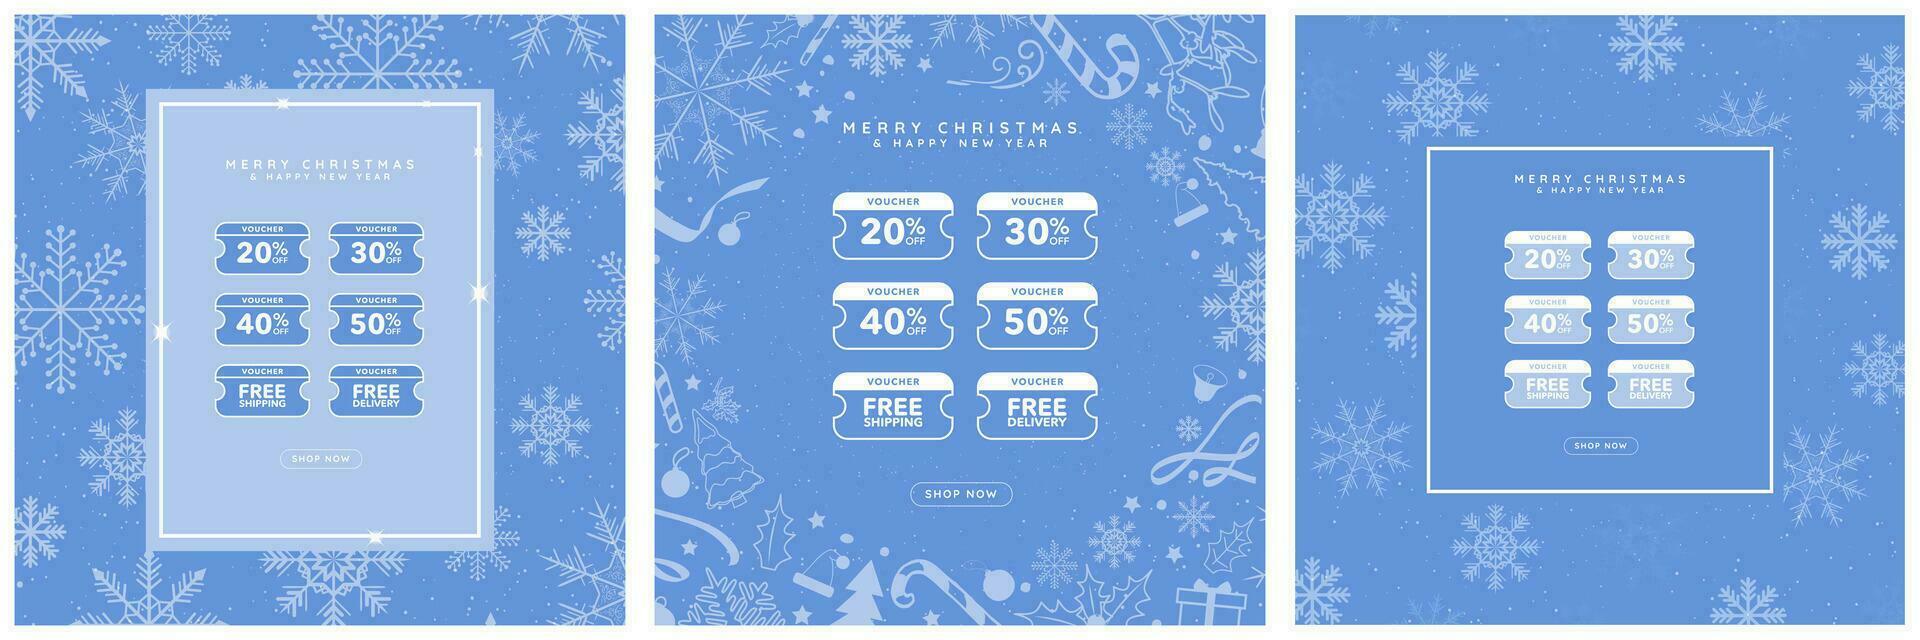 Blue Christmas special sale online vouchers posters with shop now CTA button. Group of Christmas Voucher Bundle. Christmas digital 50 coupon, free shipping, free delivery. Vector Templates.